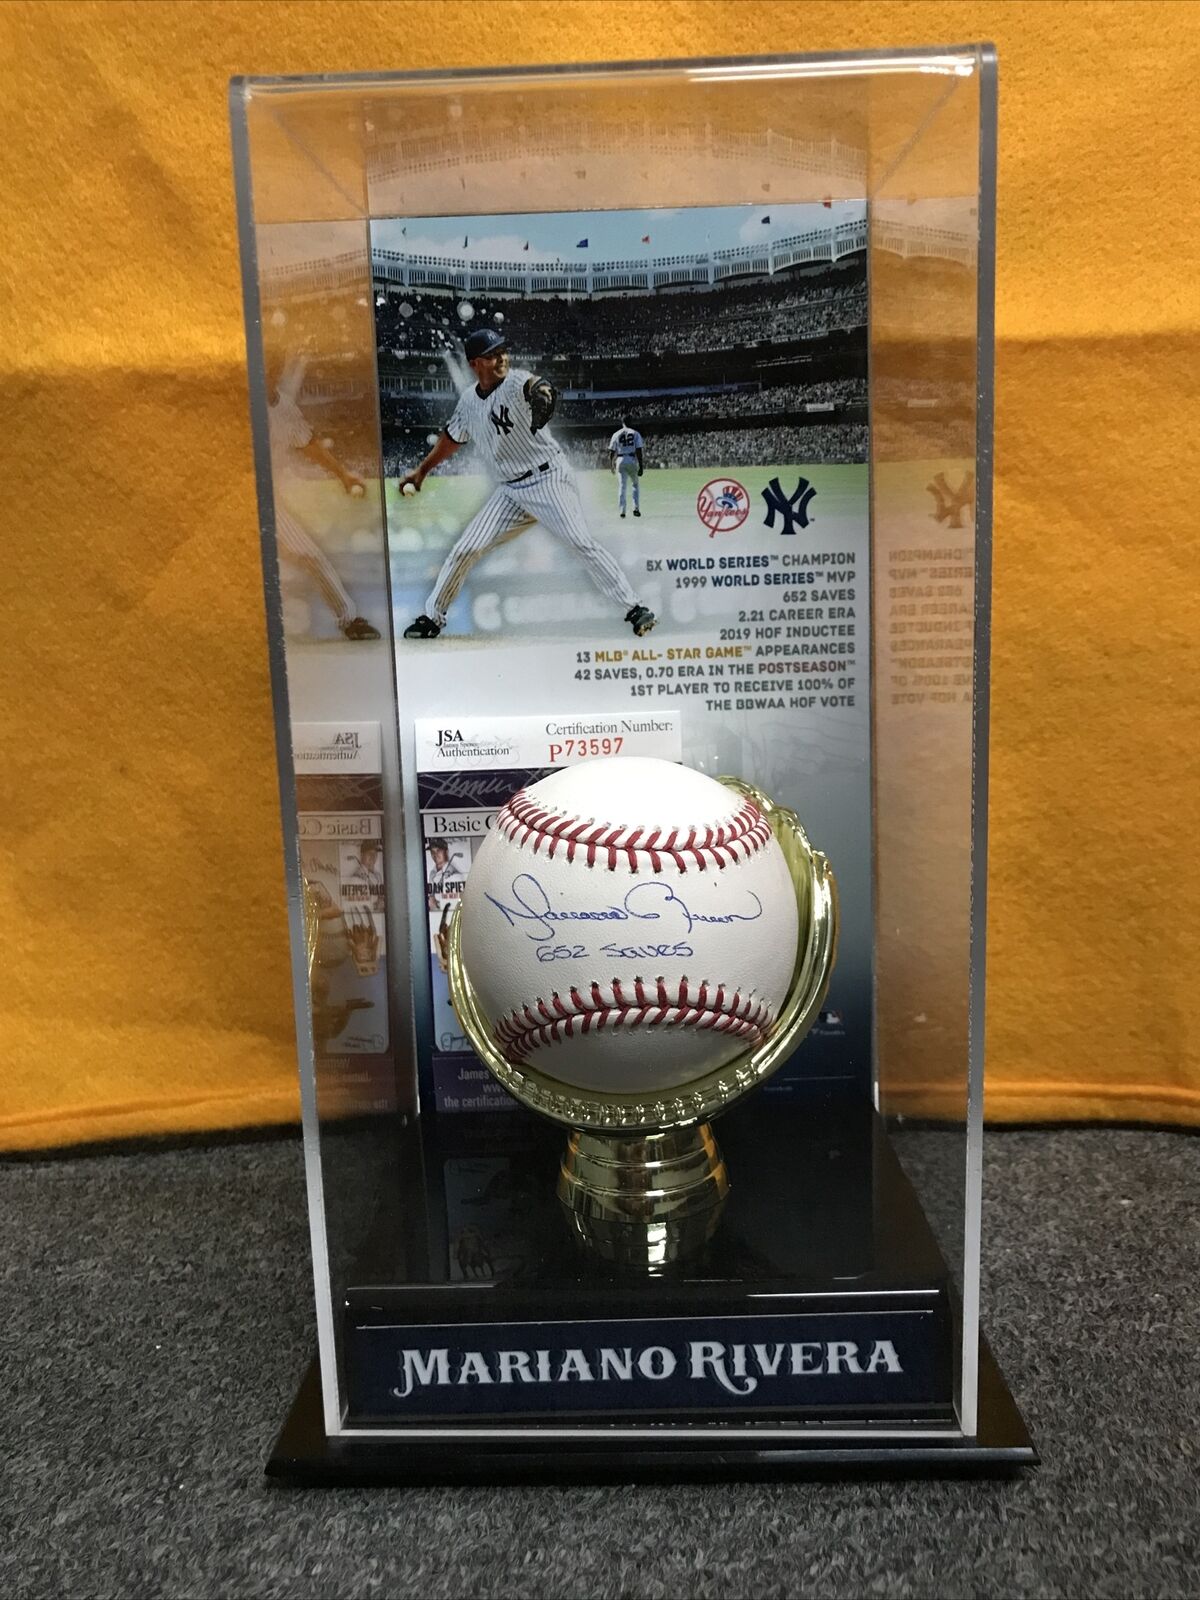 MARIANO RIVERA New York Yankees Autographed / Inscribed